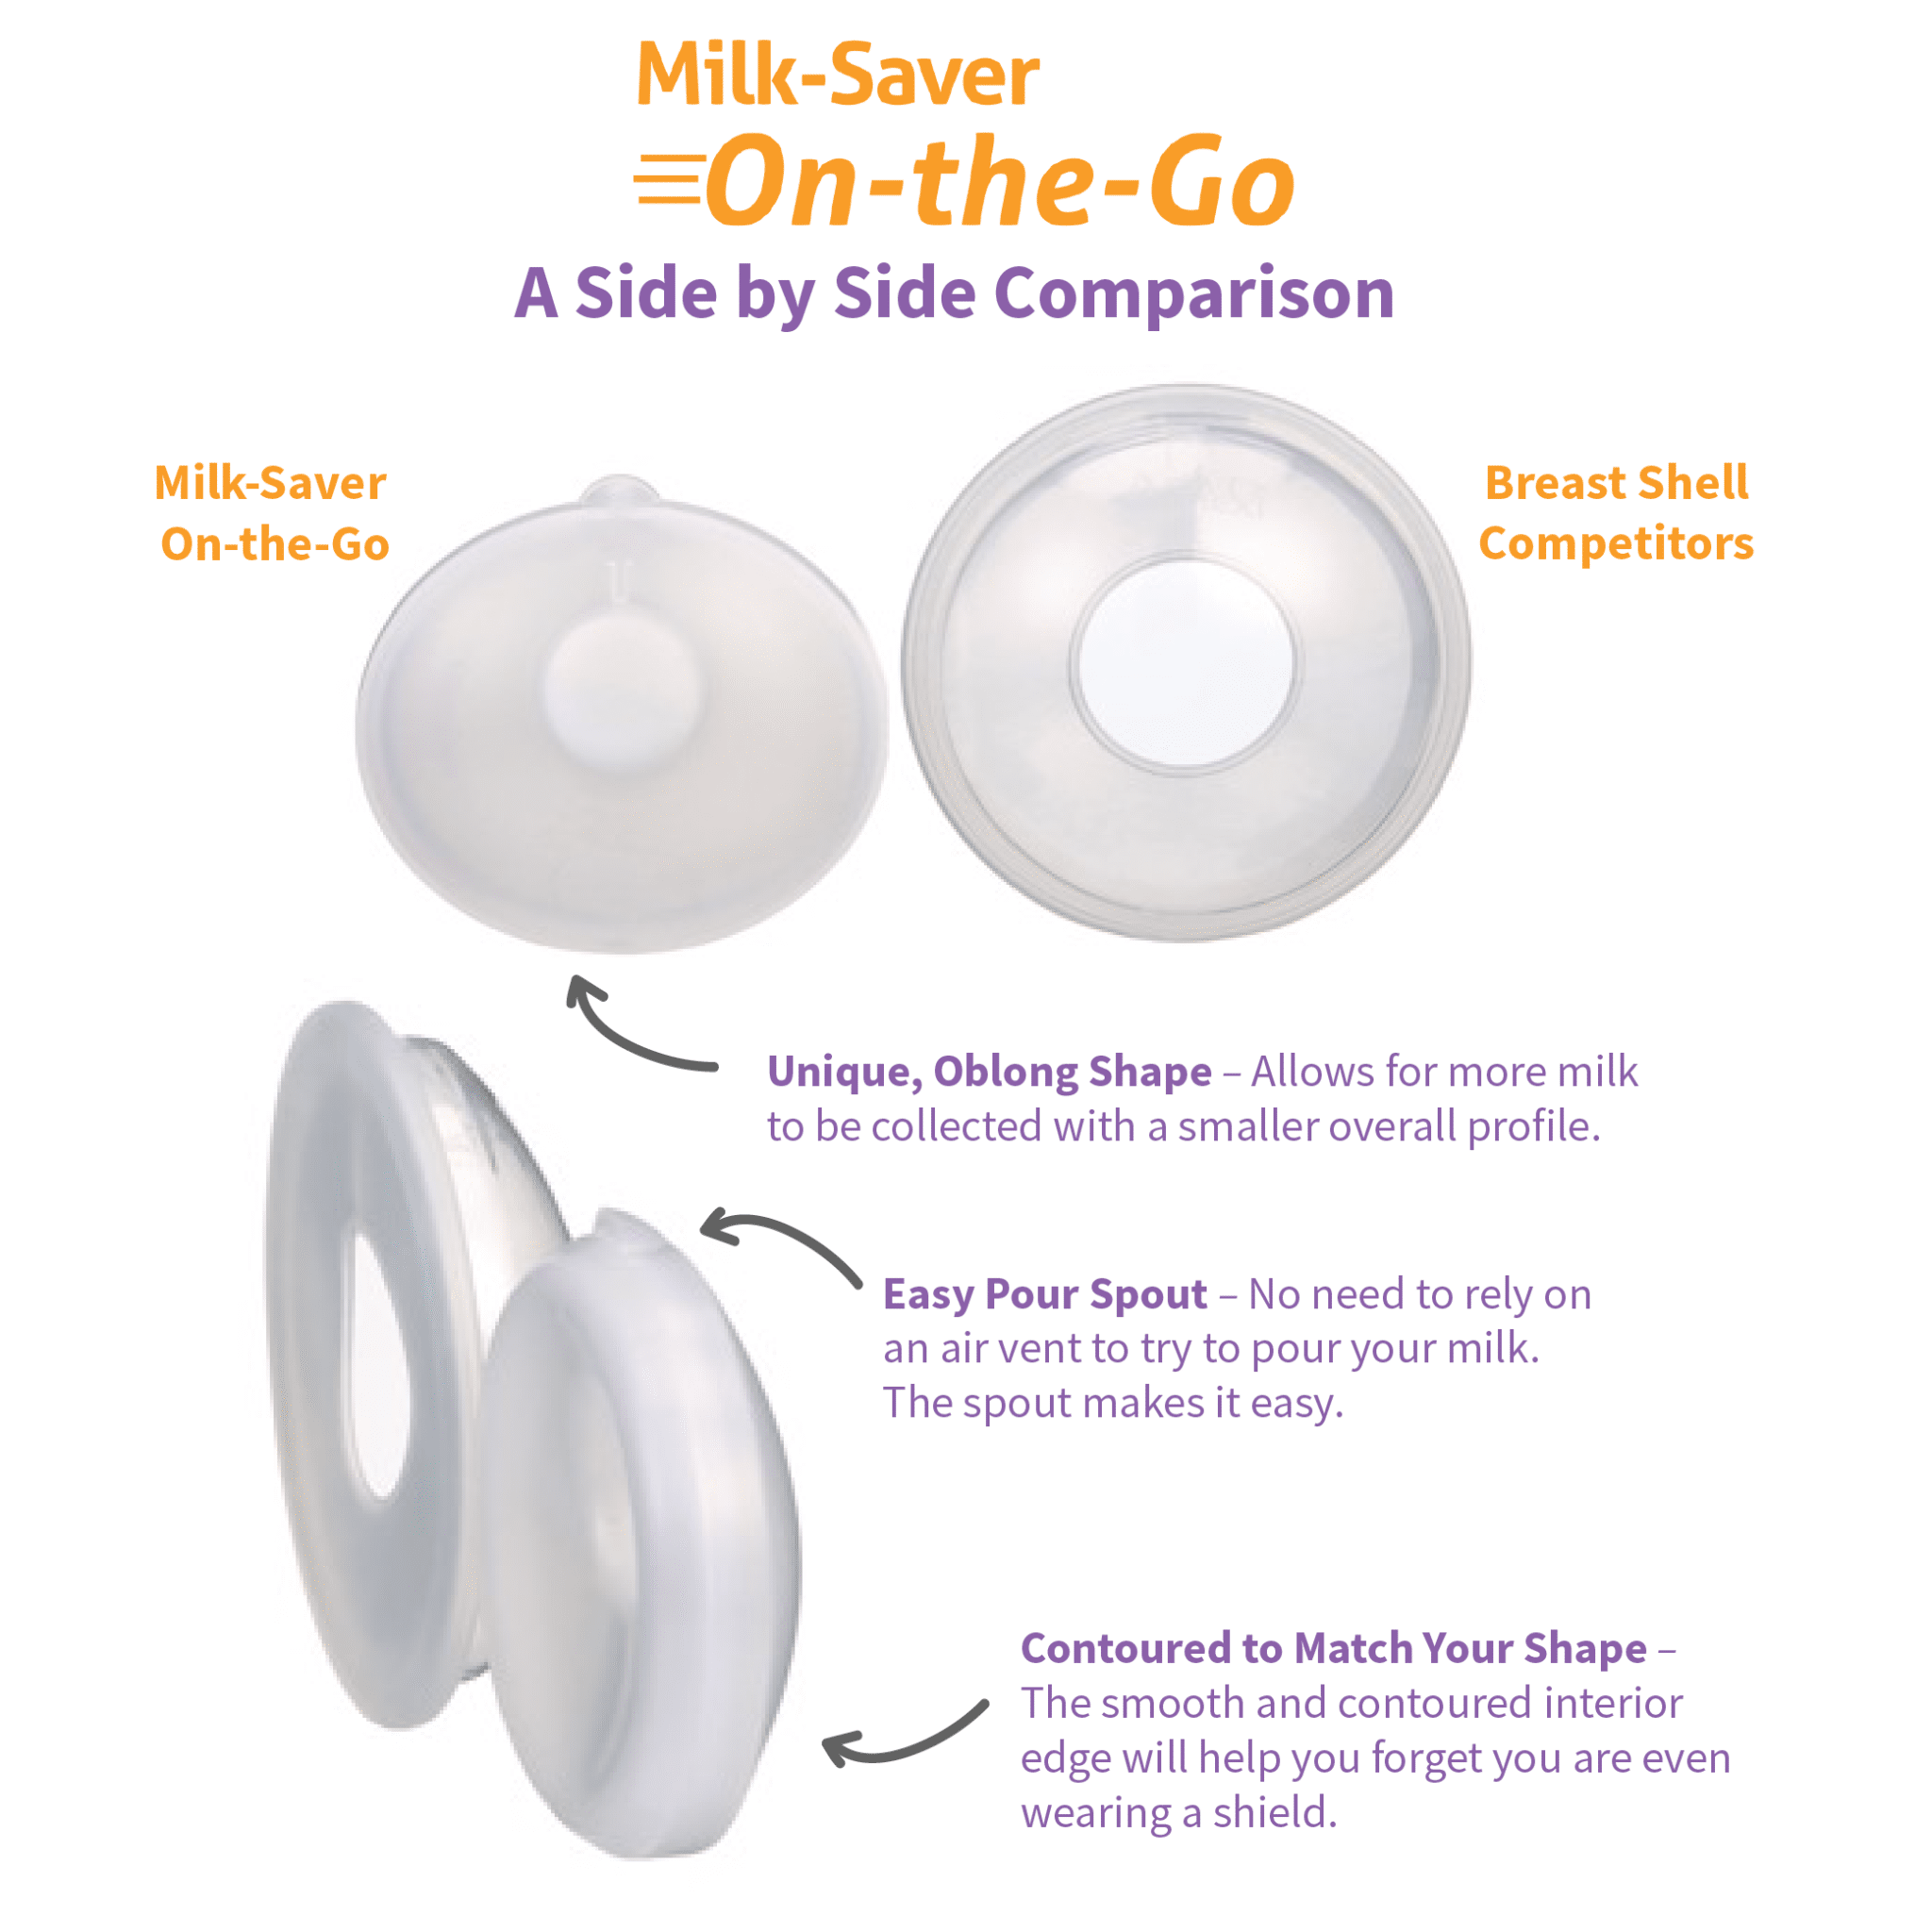 Milk-Saver on the Go - Side by Side Comparison